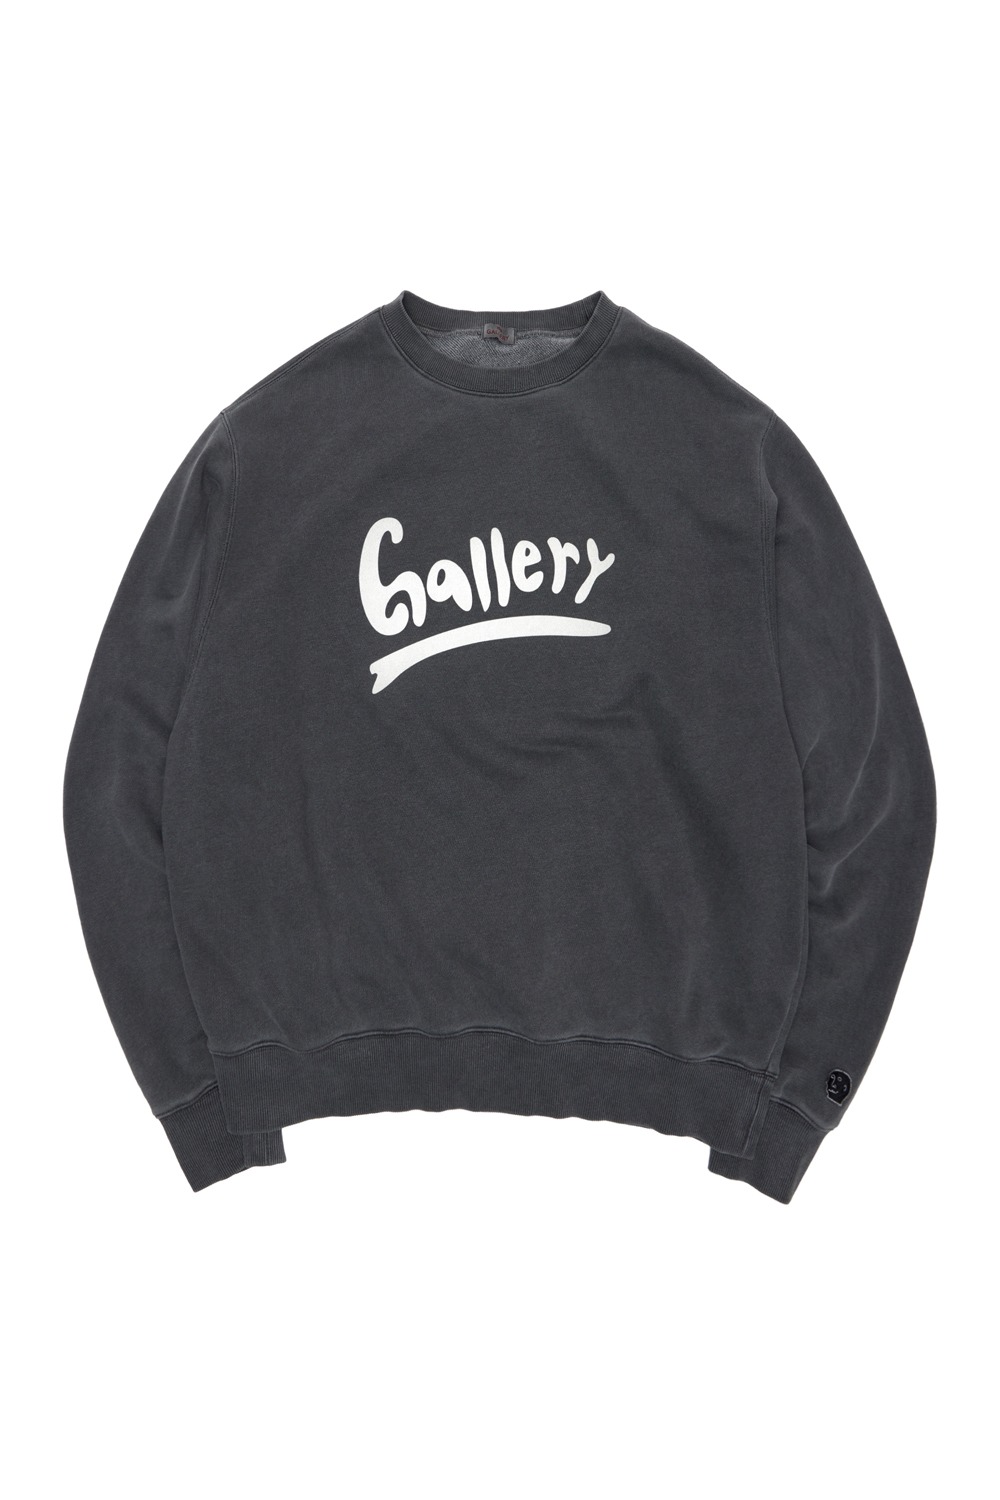 Gallery Wave Logo Graphic Sweat Shirt - Charcoal Grey